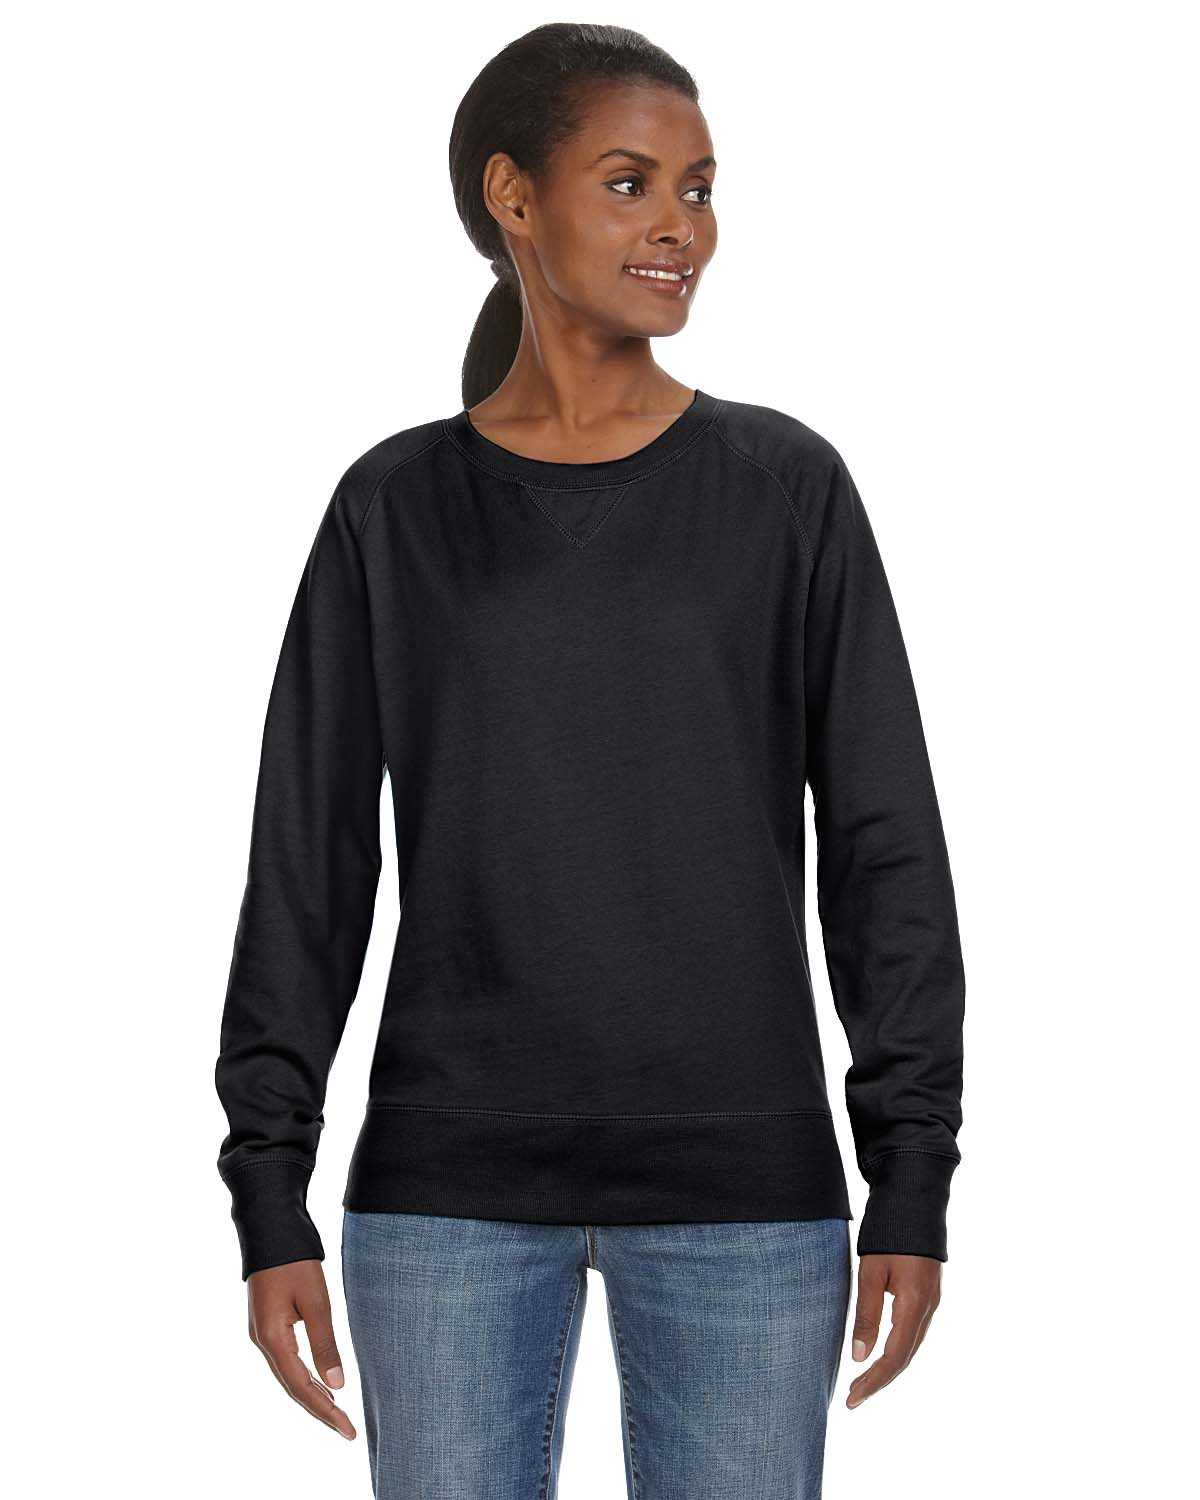 LAT 3762 Ladies' Slouchy French Terry Pullover | ApparelChoice.com